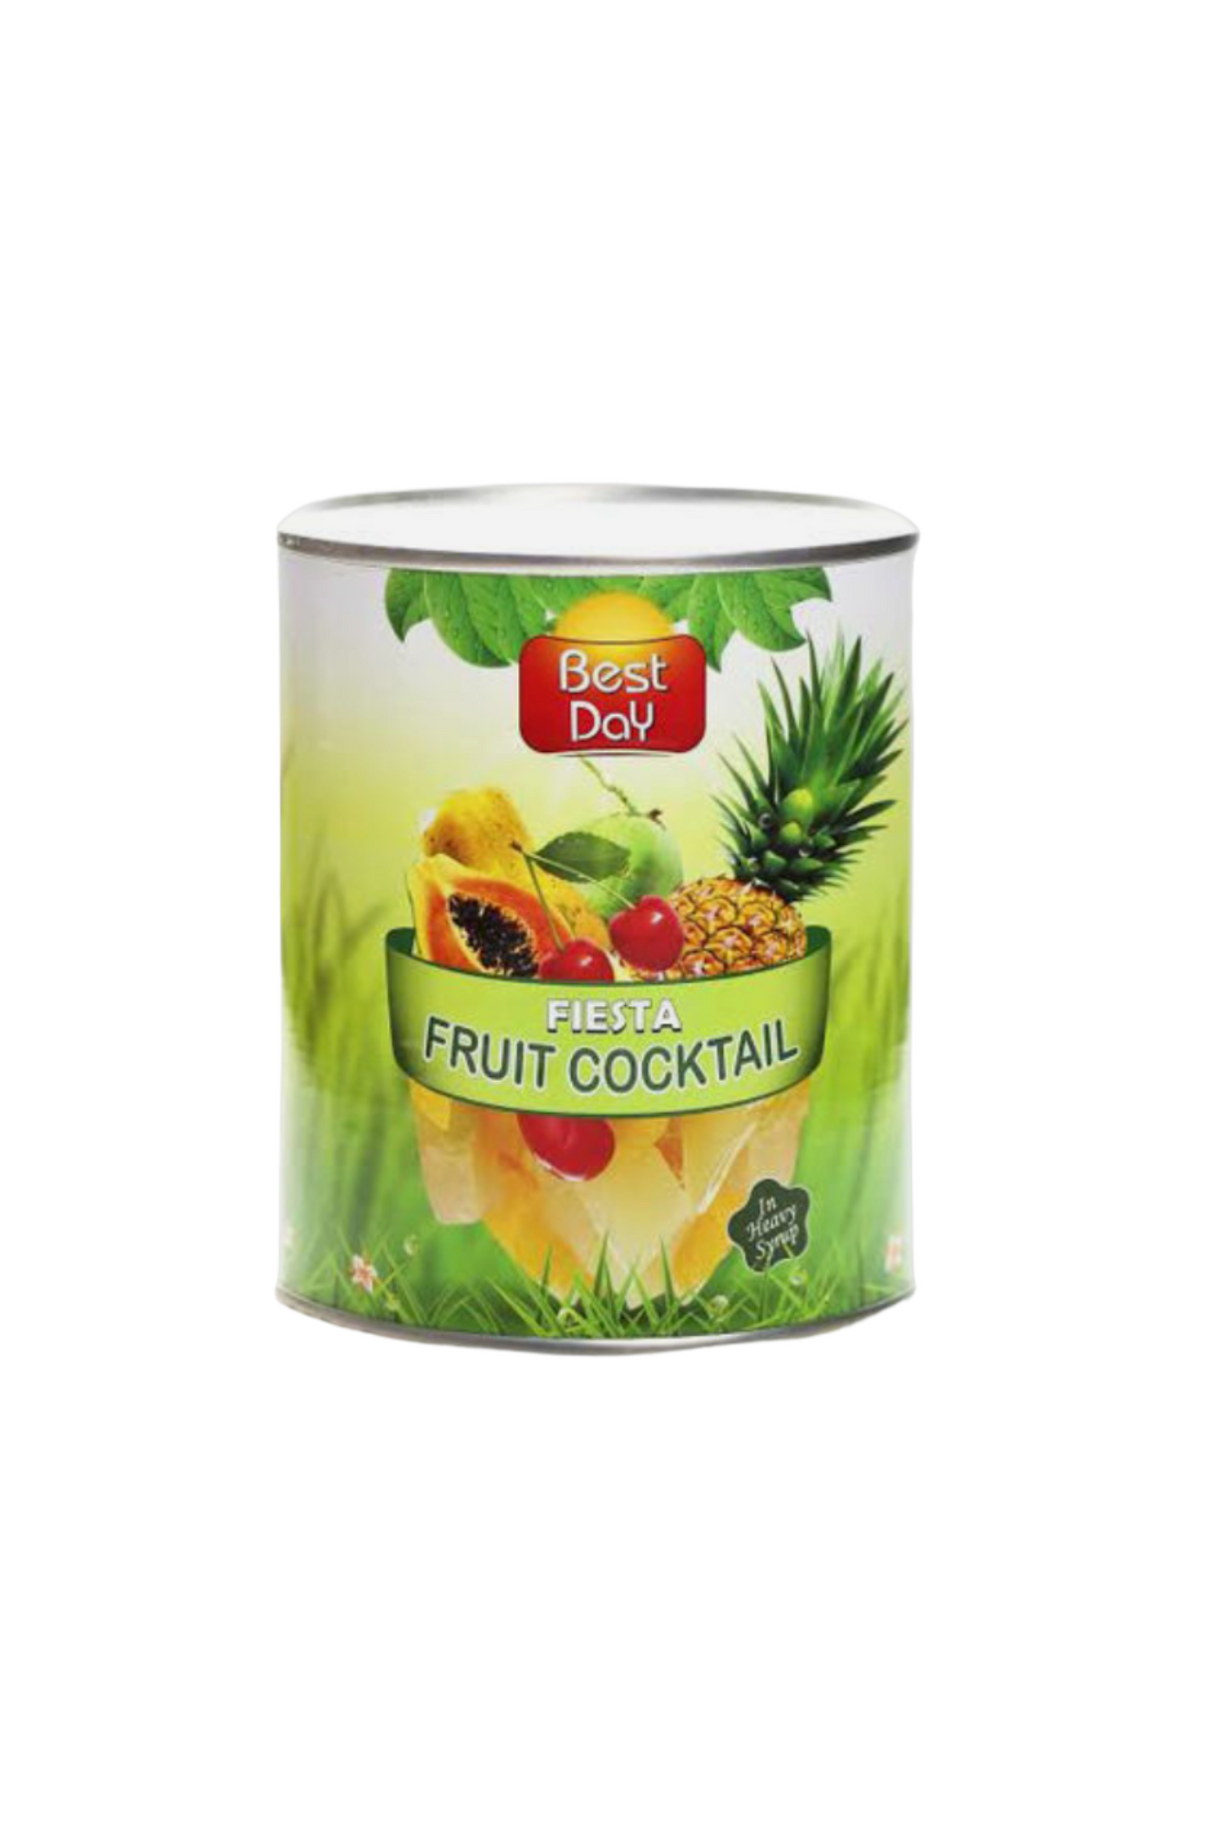 best day fruit cocktail 836g